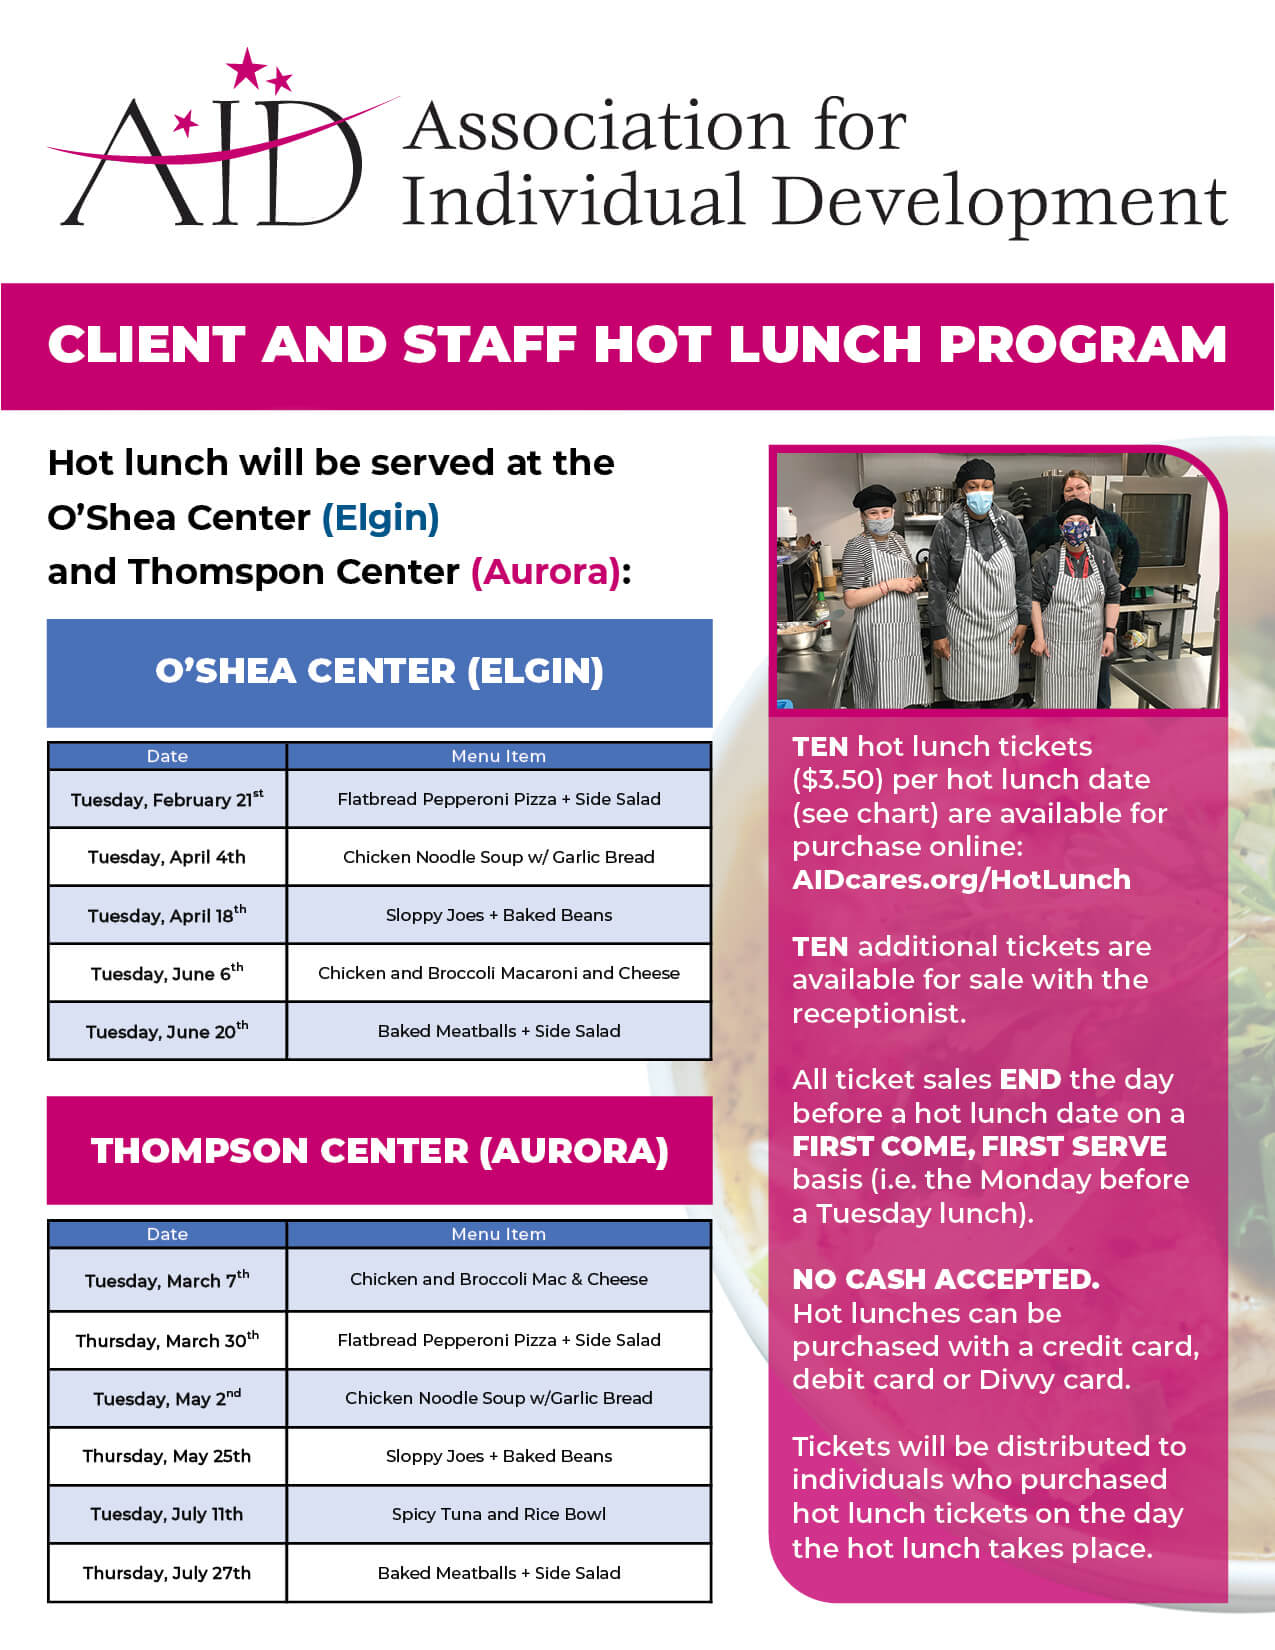 TEN hot lunch tickets ($3.50) per hot lunch date (see chart) are available for purchase online: AIDcares.org/HotLunch TEN additional tickets are available for sale with the receptionist. All ticket sales END the day before a hot lunch date on a FIRST COME, FIRST SERVE basis (i.e. the Monday before a Tuesday lunch). NO CASH ACCEPTED. Hot lunches can be purchased with a credit card, debit card or Divvy card. Tickets will be distributed to individuals who purchased hot lunch tickets on the day the hot lunch takes place.